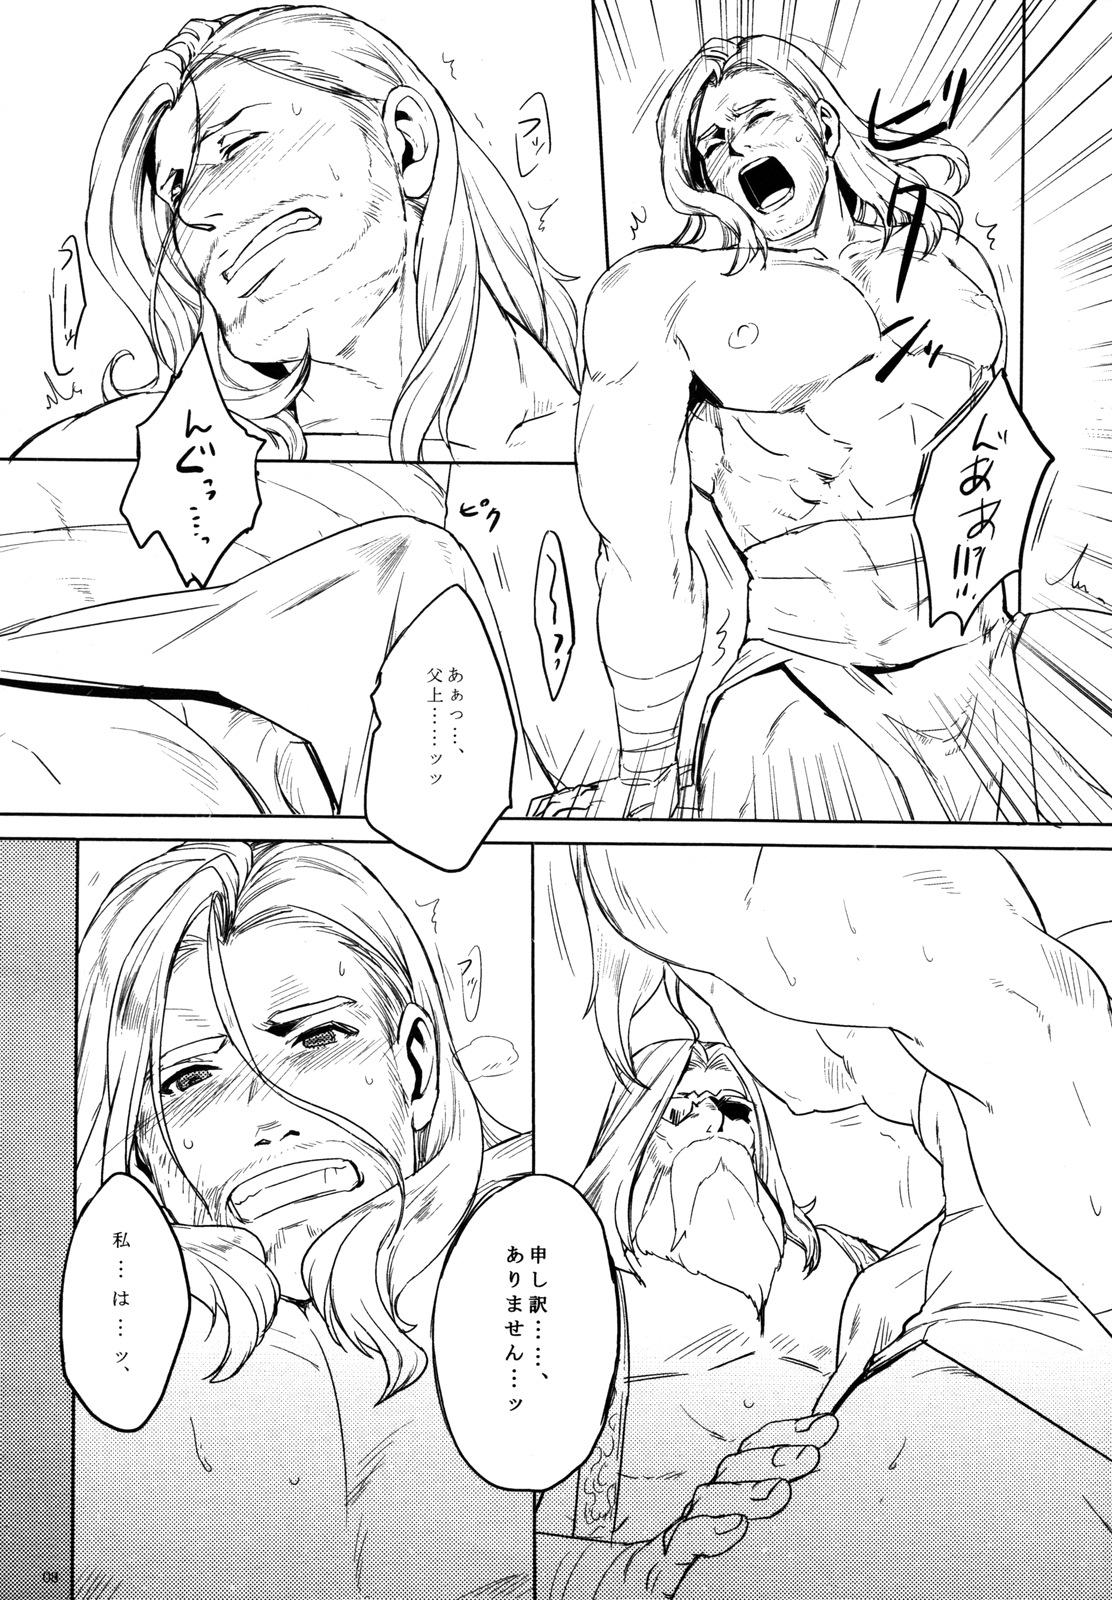 Fit THY DEEDS - Avengers Making Love Porn - Page 7